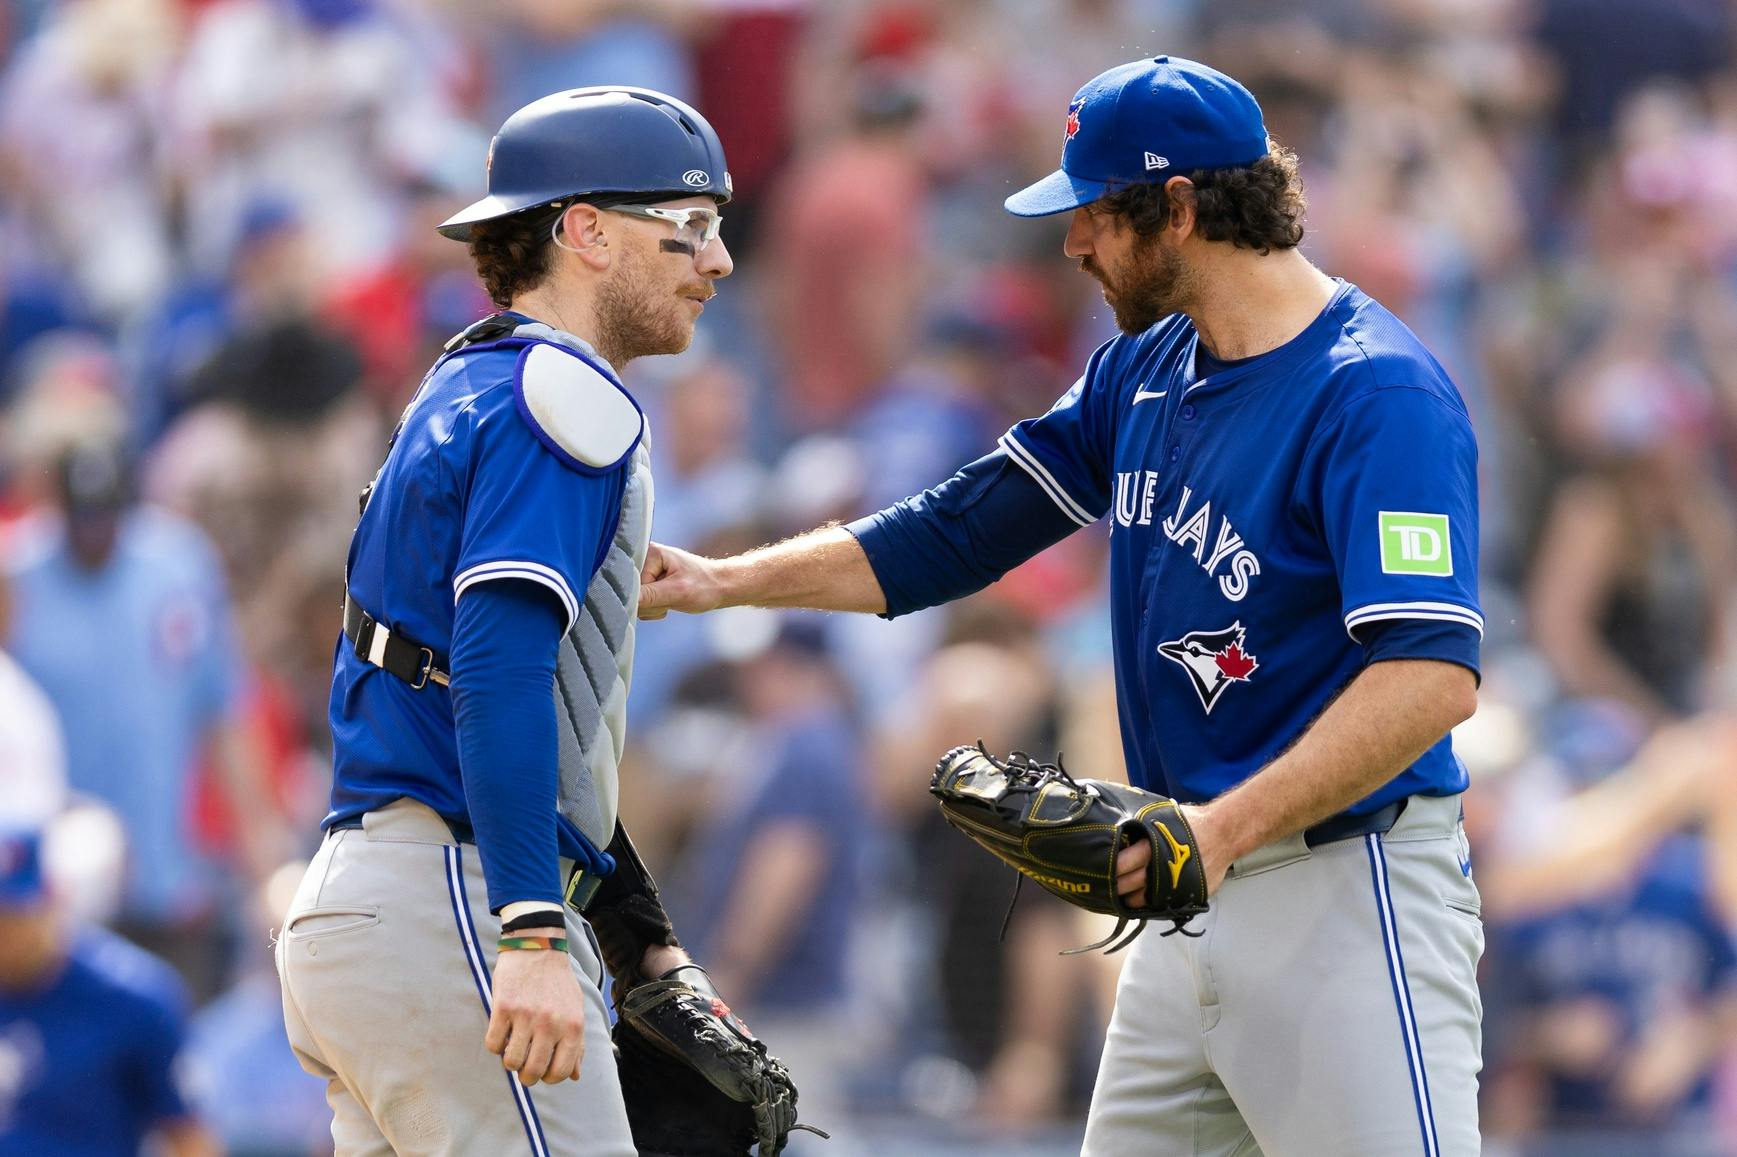 Toronto Blue Jays pitcher Jordan Romano (68) and catcher Danny Jansen (9) react to a victory against the Philadelphia Phillies at Citizens Bank Park. Mandatory Credit: Bill Streicher-USA TODAY Sports